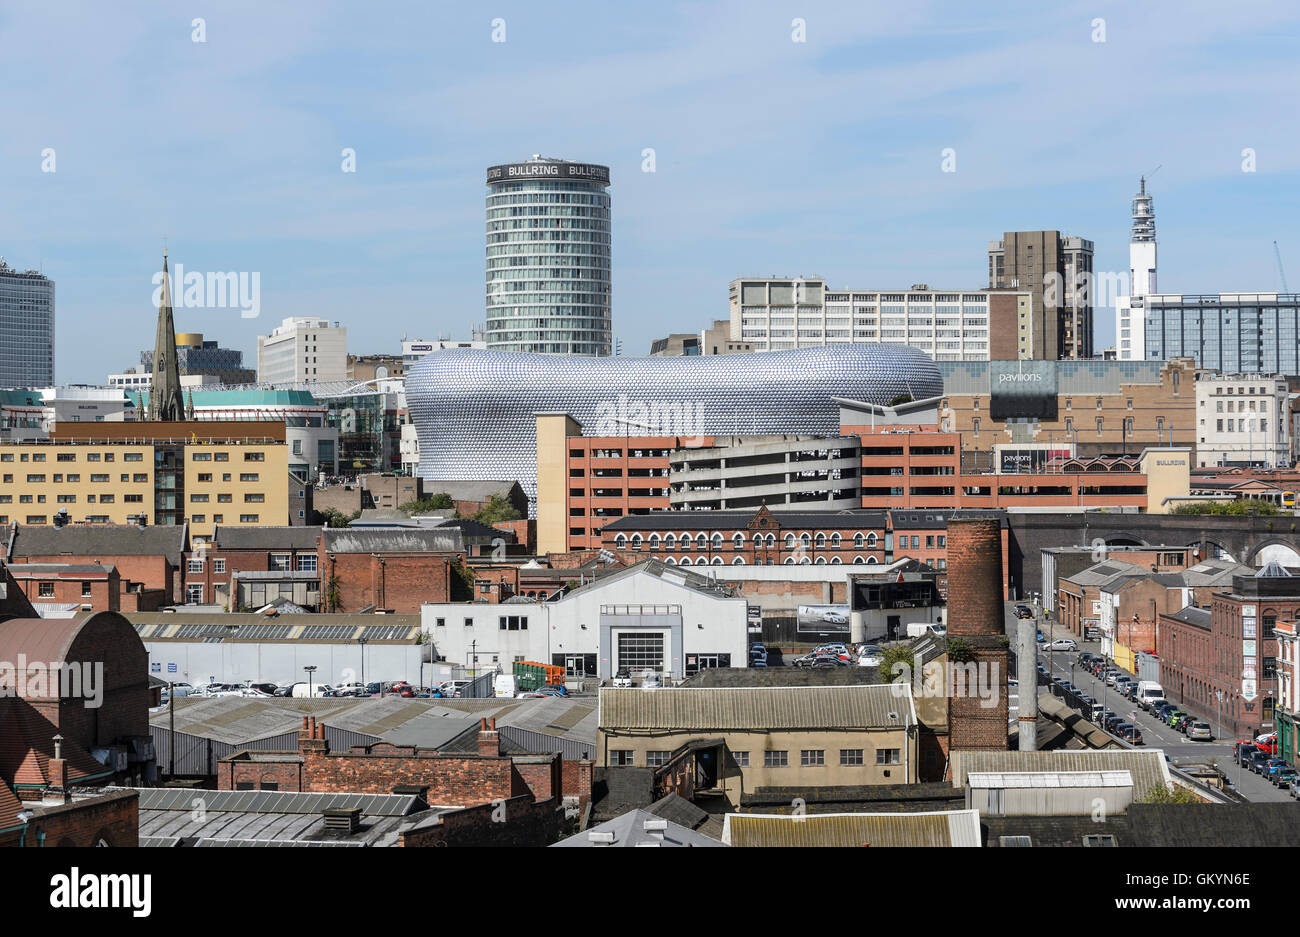 View towards Birmingham City centre (including the Bullring, the Rotunda) and the Telecom Tower) from the Digbeth area of the City. Stock Photo